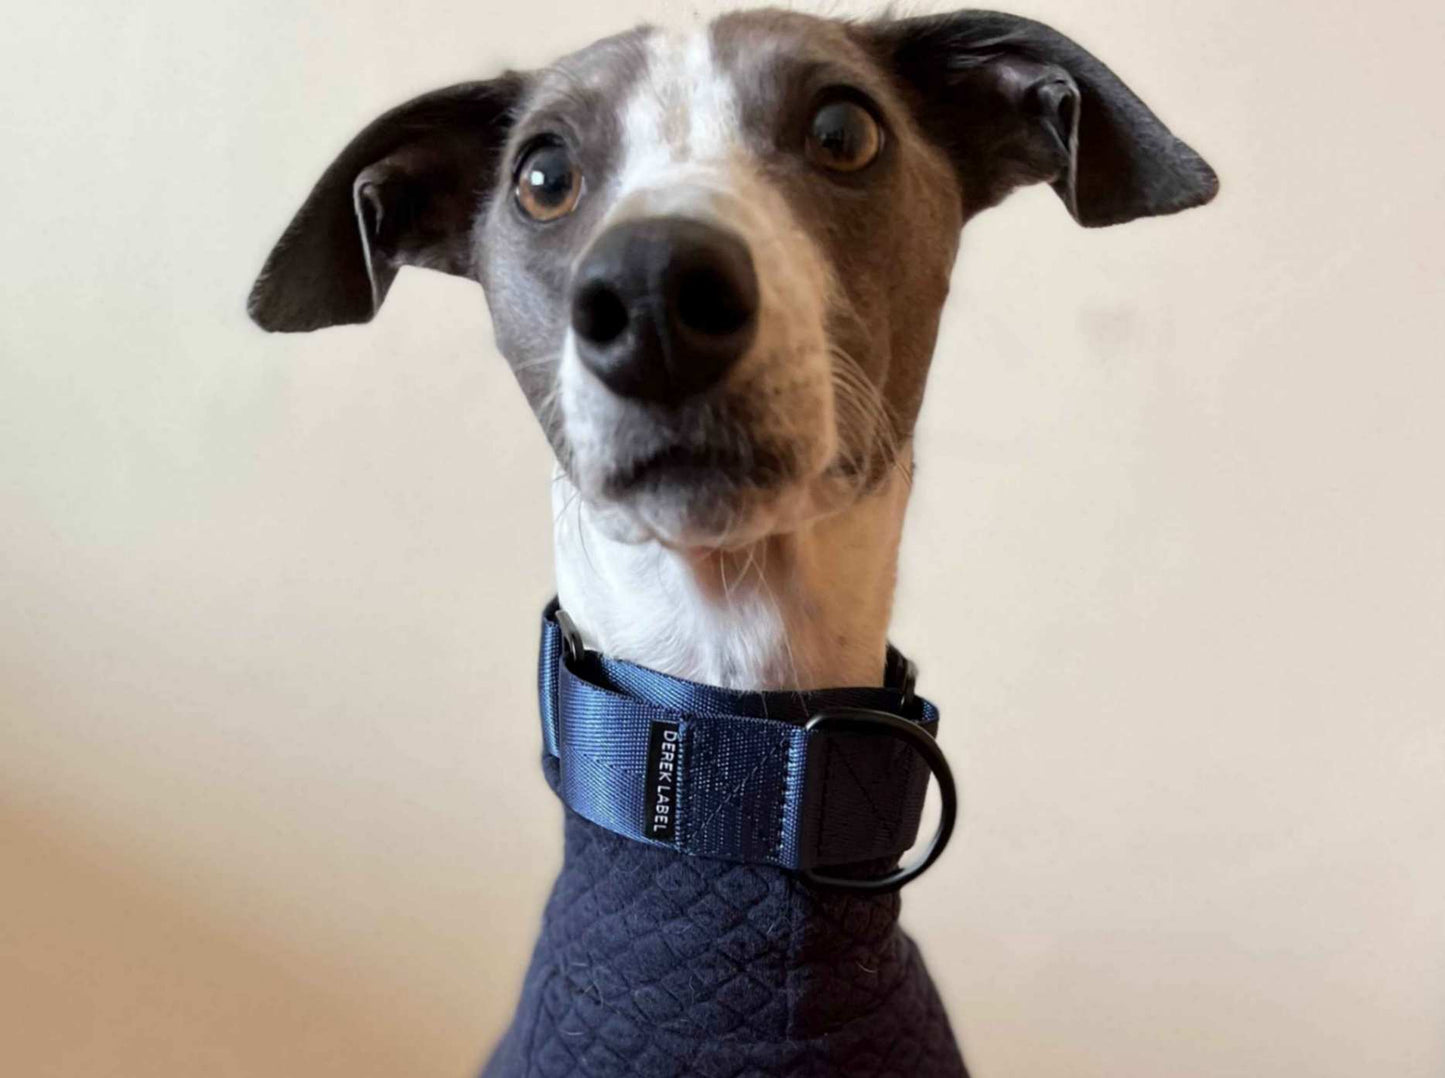 Whippet wearing a blue Martingale dog collar